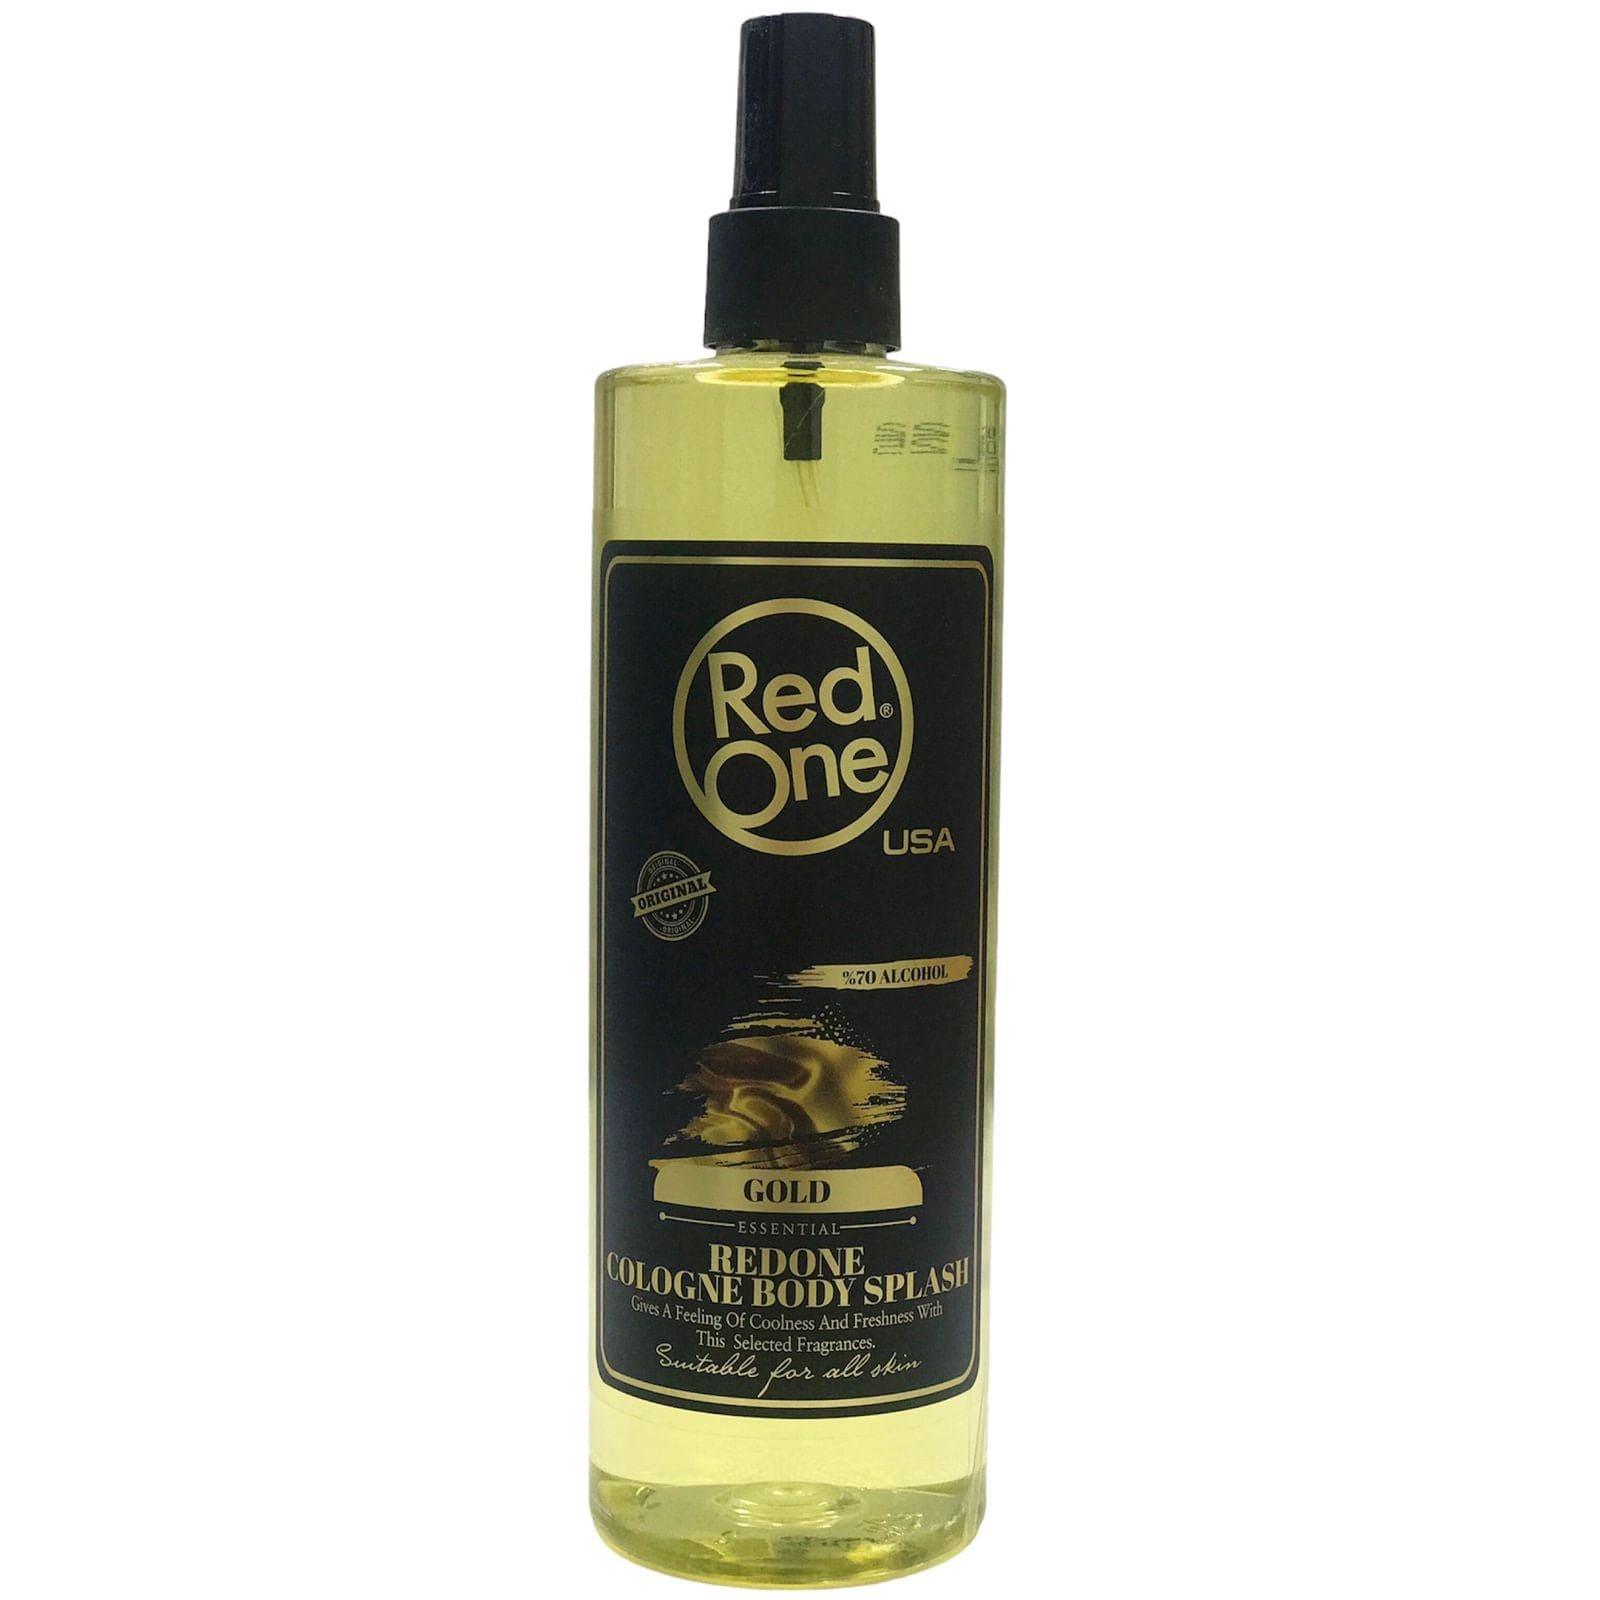 RedOne After Shave Cologne Body Splash Gold 400ml